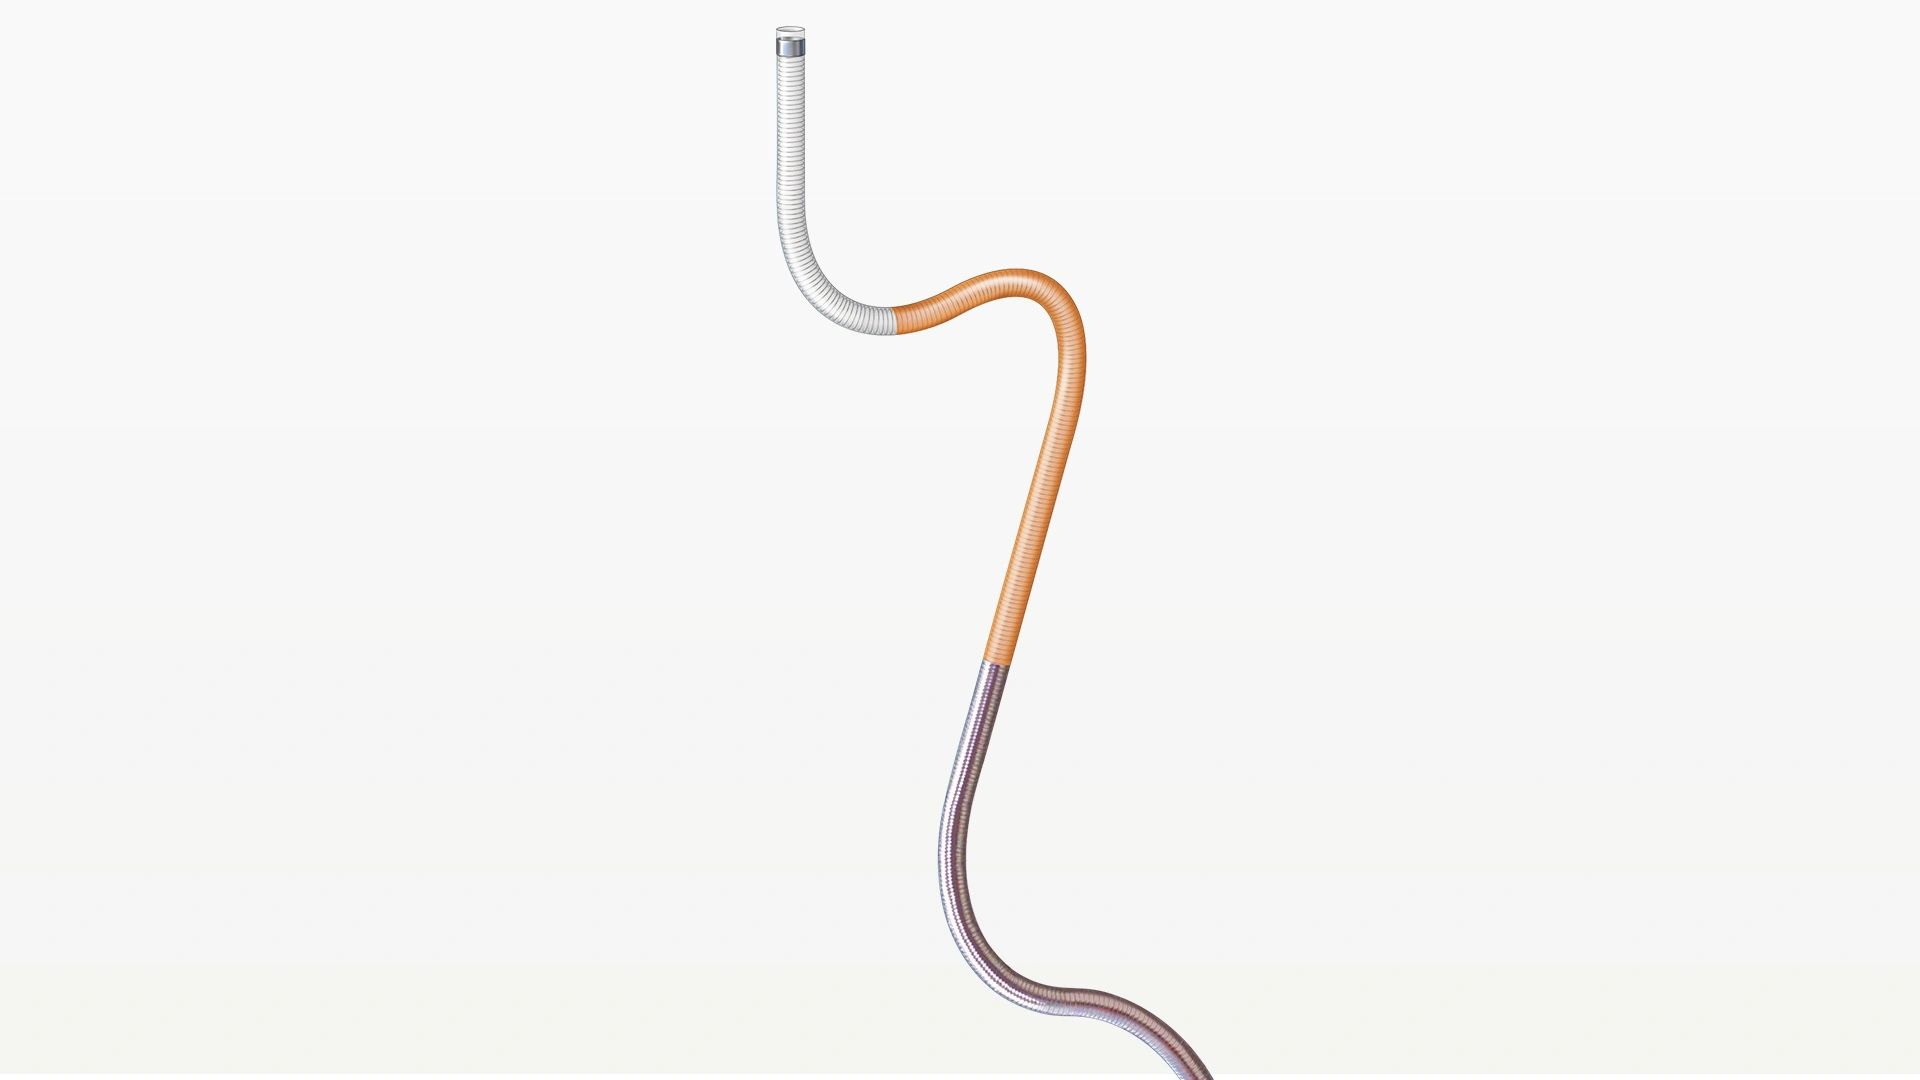 Illustration of the Tip of the BENCHMARK 071 Access Catheter for use in neurovascular access